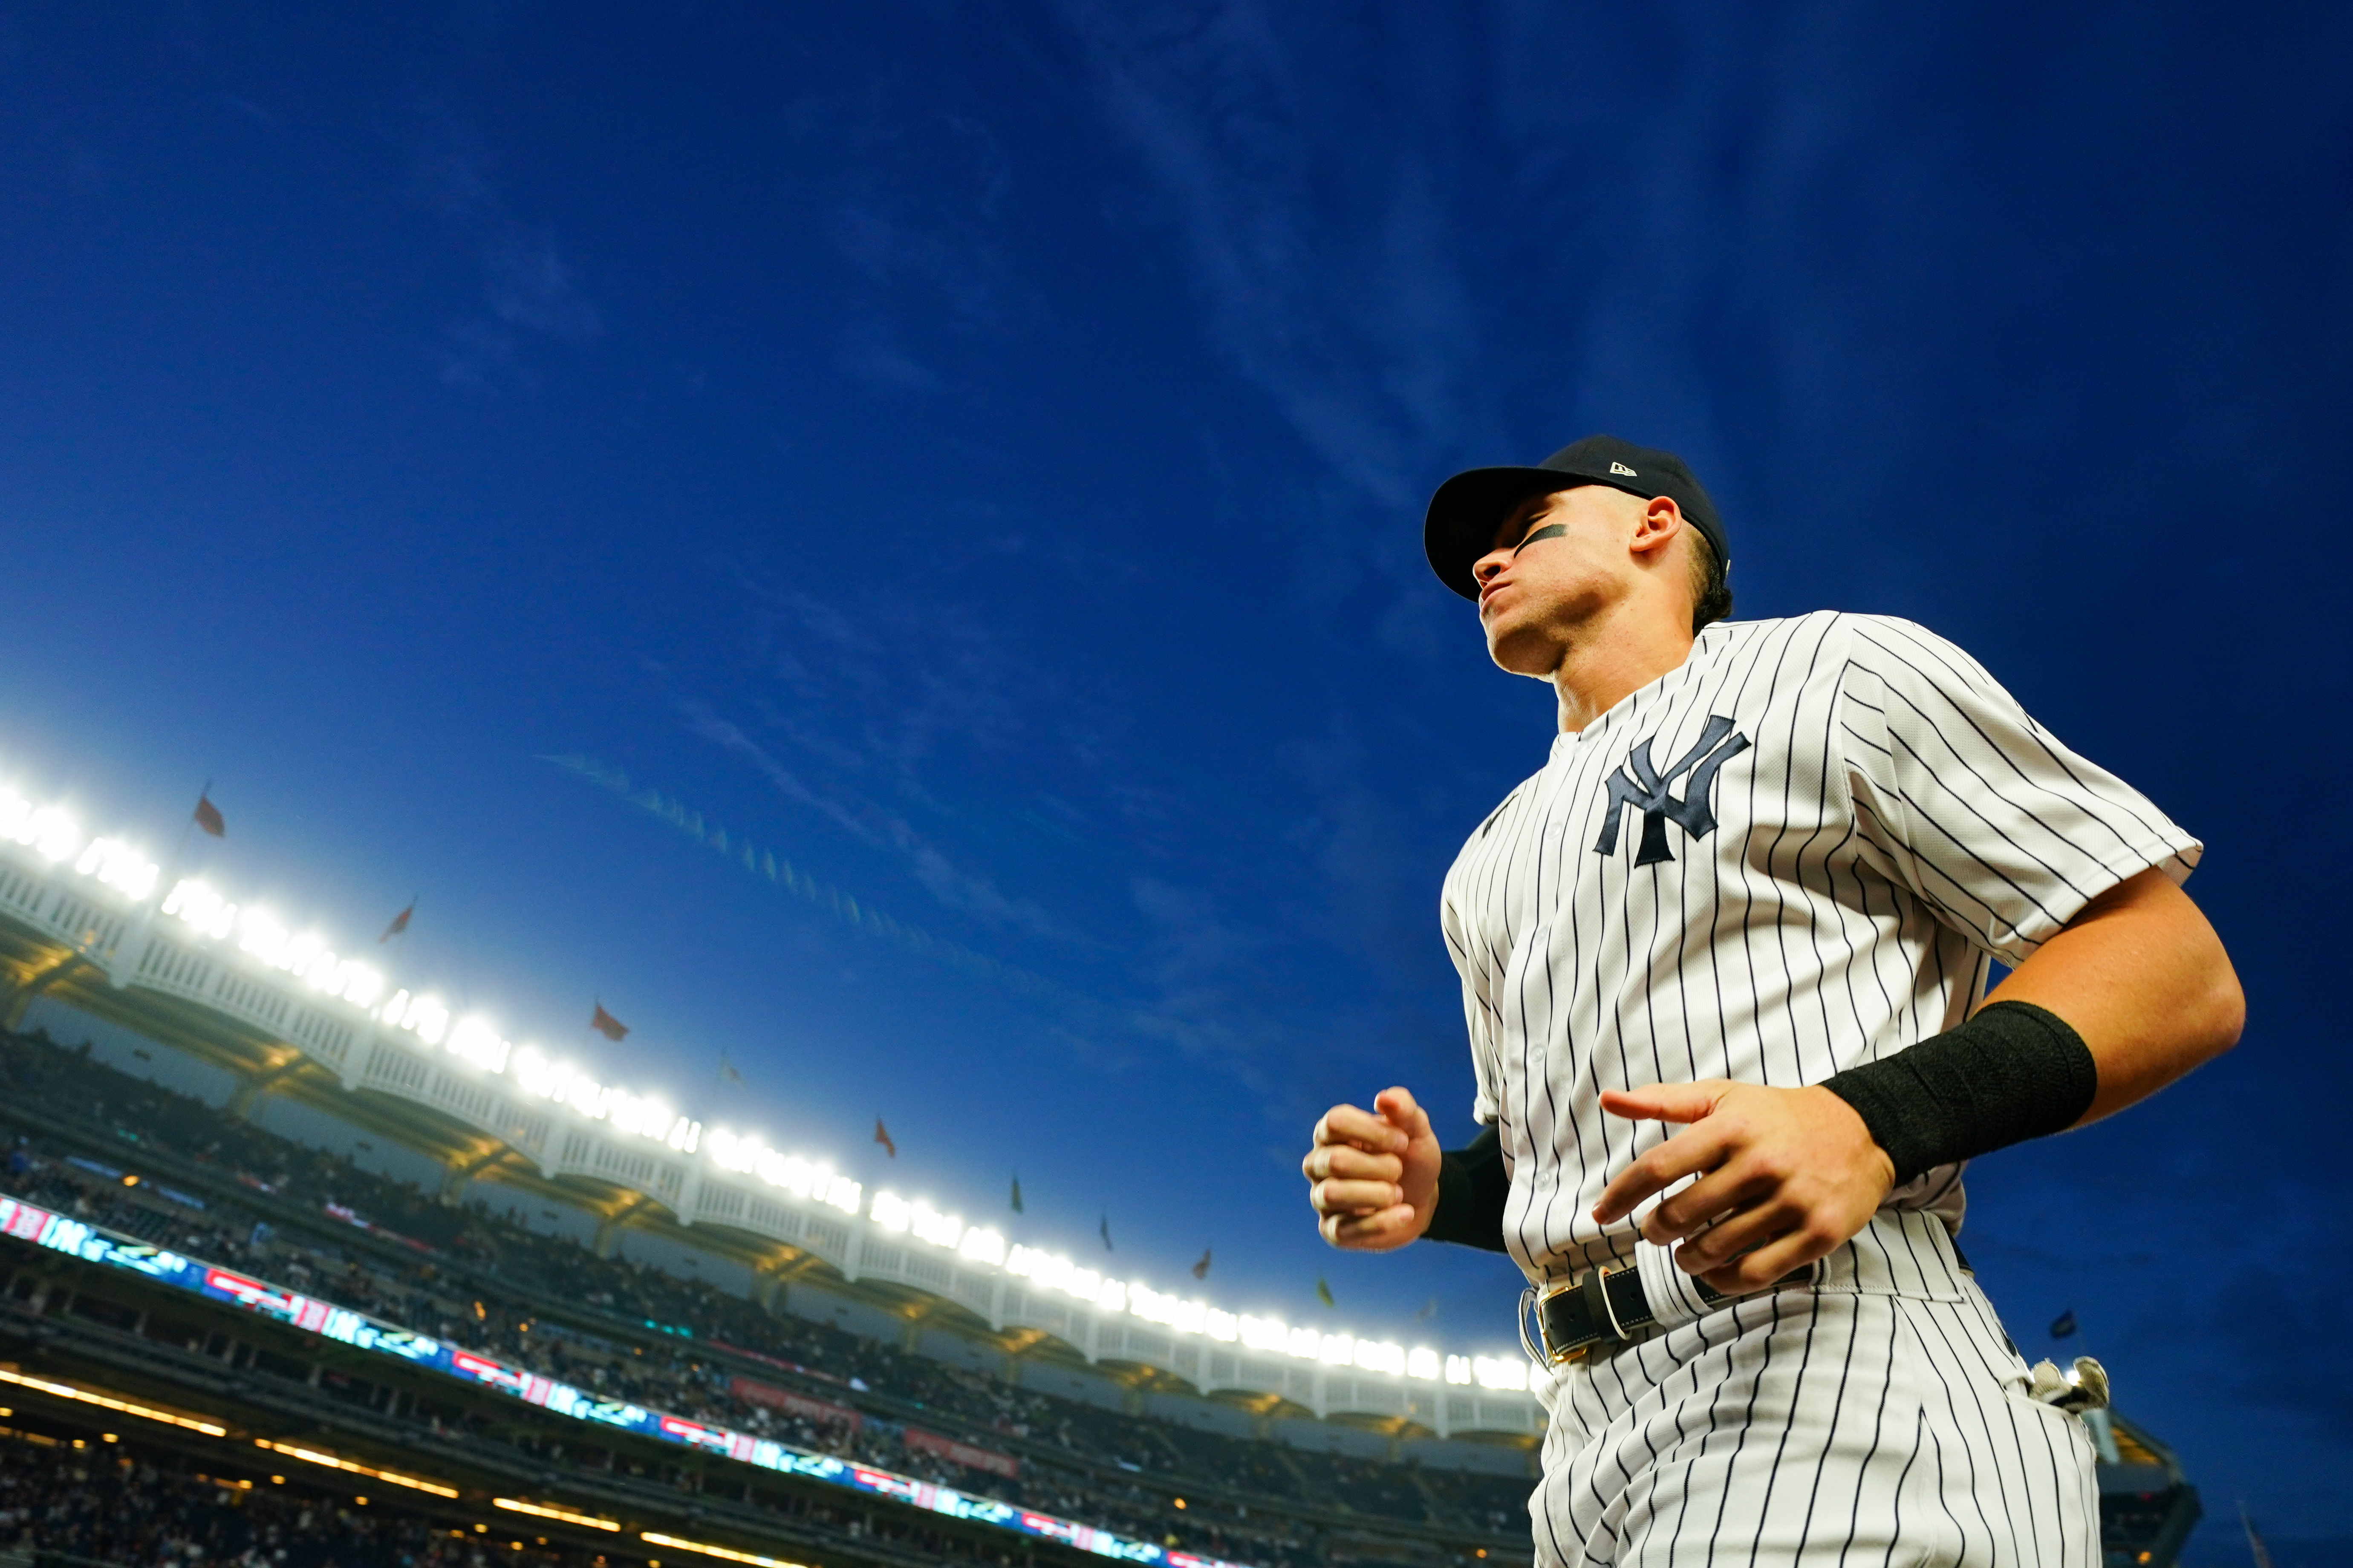 Aaron Judge Will Be the Next Captain of the New York Yankees - InsideHook